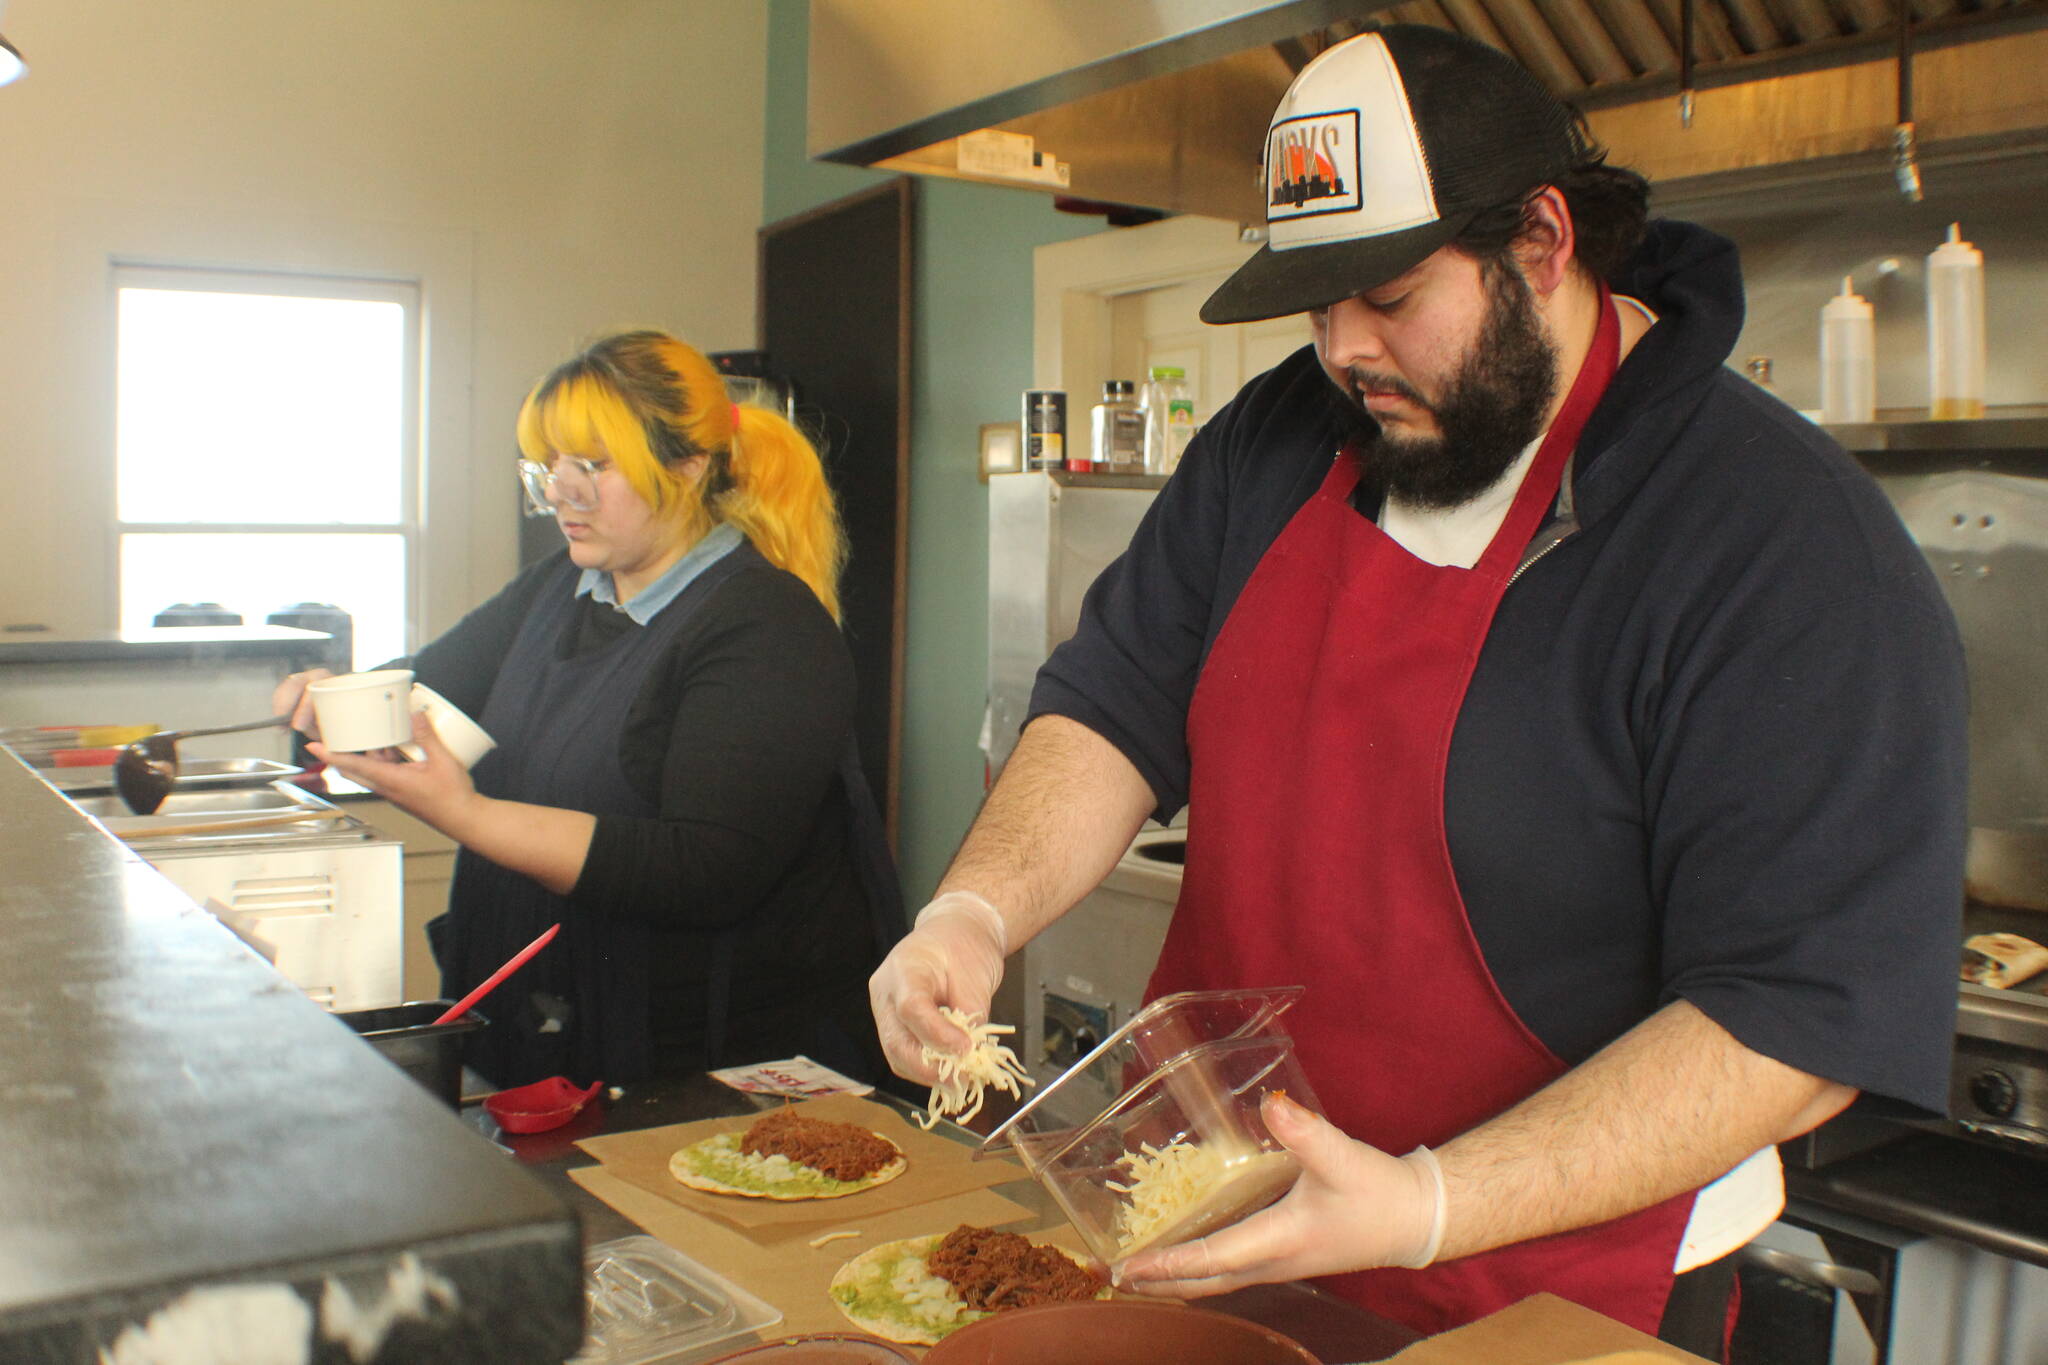 Veronica and Mario Saenz prepare food at their newly reopened Mexican restaurant, Molka Xete. (Photo by Karina Andrew/Whidbey News-Times)